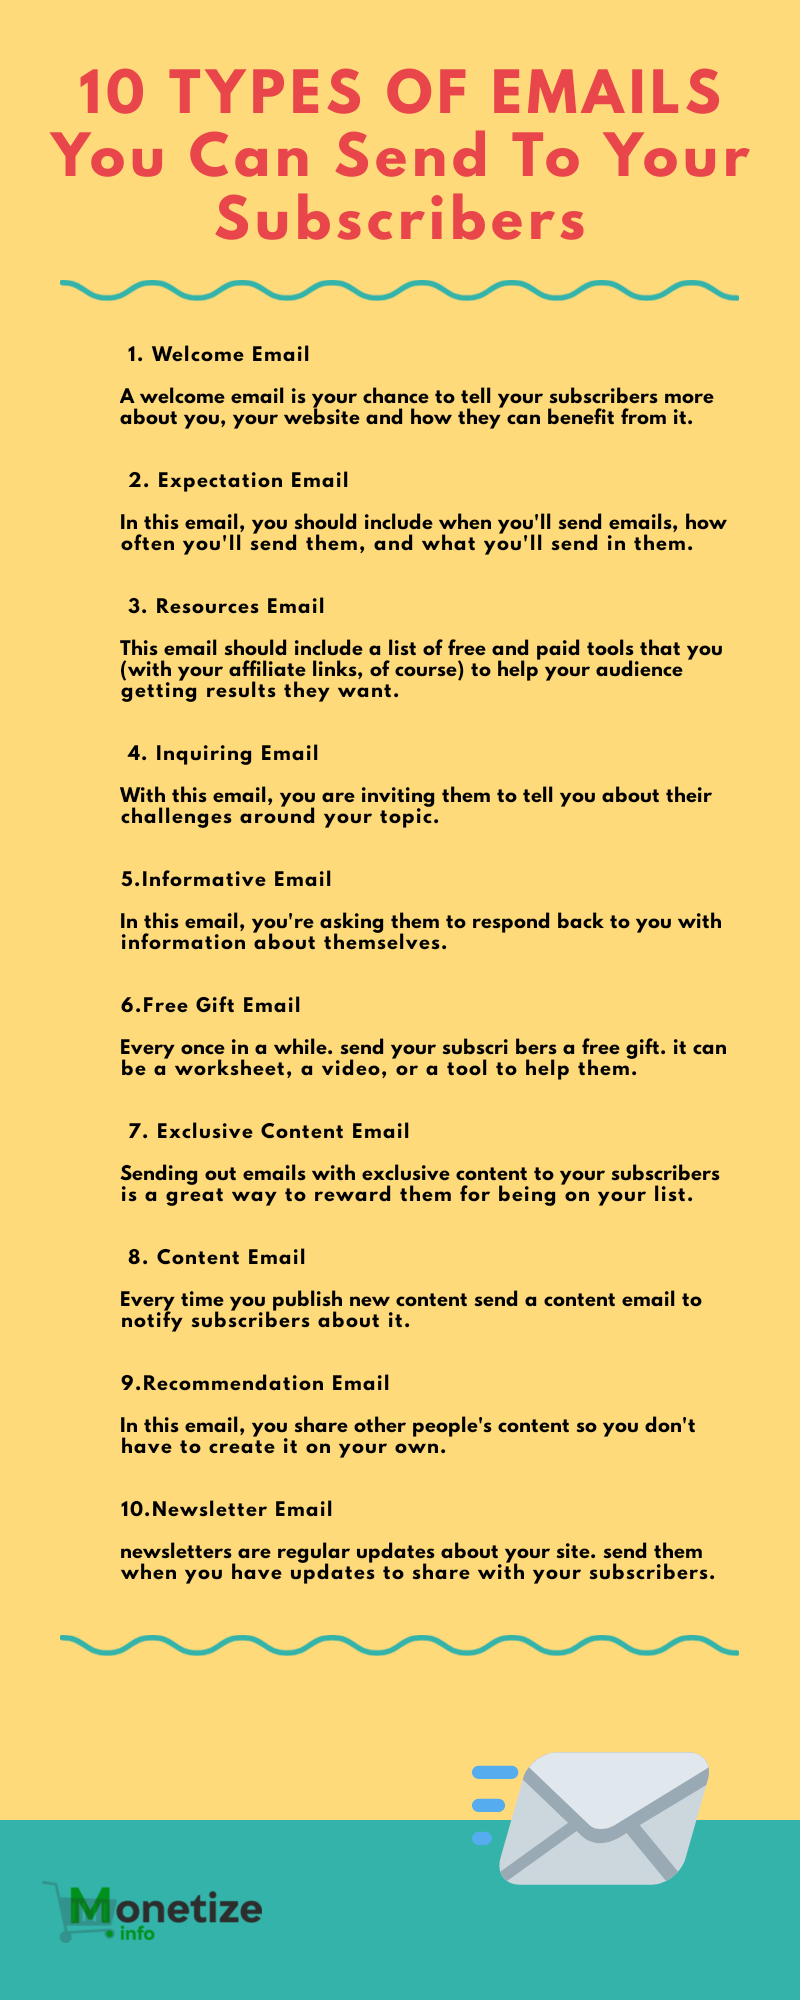 Infographic - 10 Types of Emails You Can Send To Your Subscribers